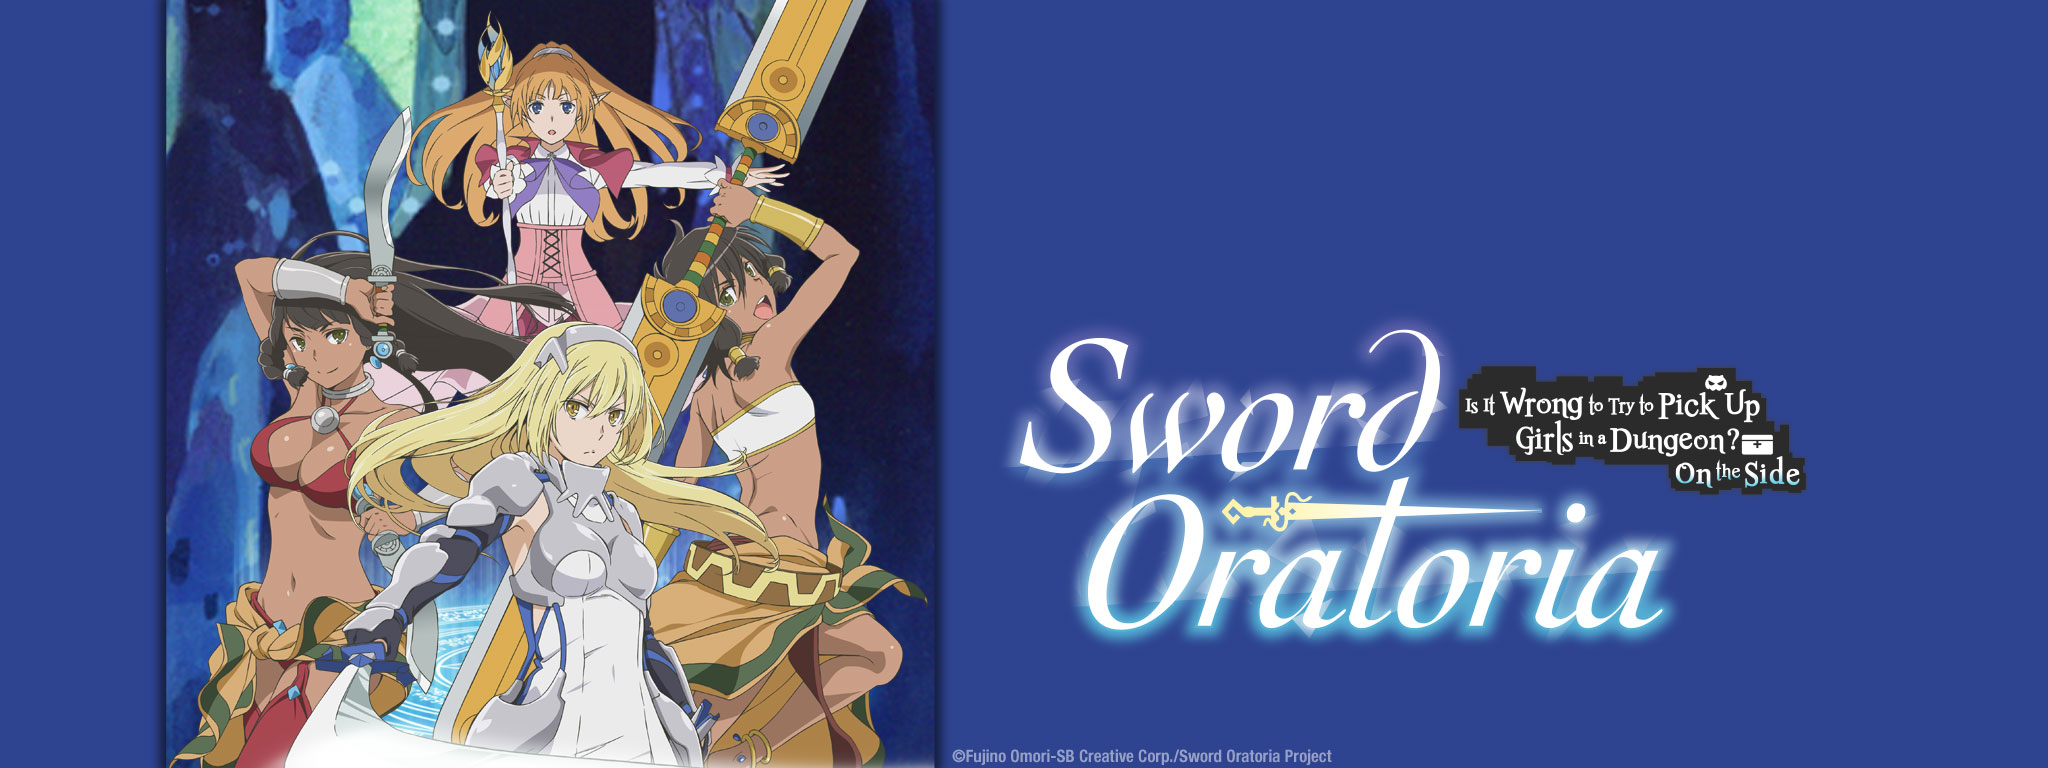 Title Art for Sword Oratoria: Is it Wrong to Try to Pick Up Girls in a Dungeon? On the Side